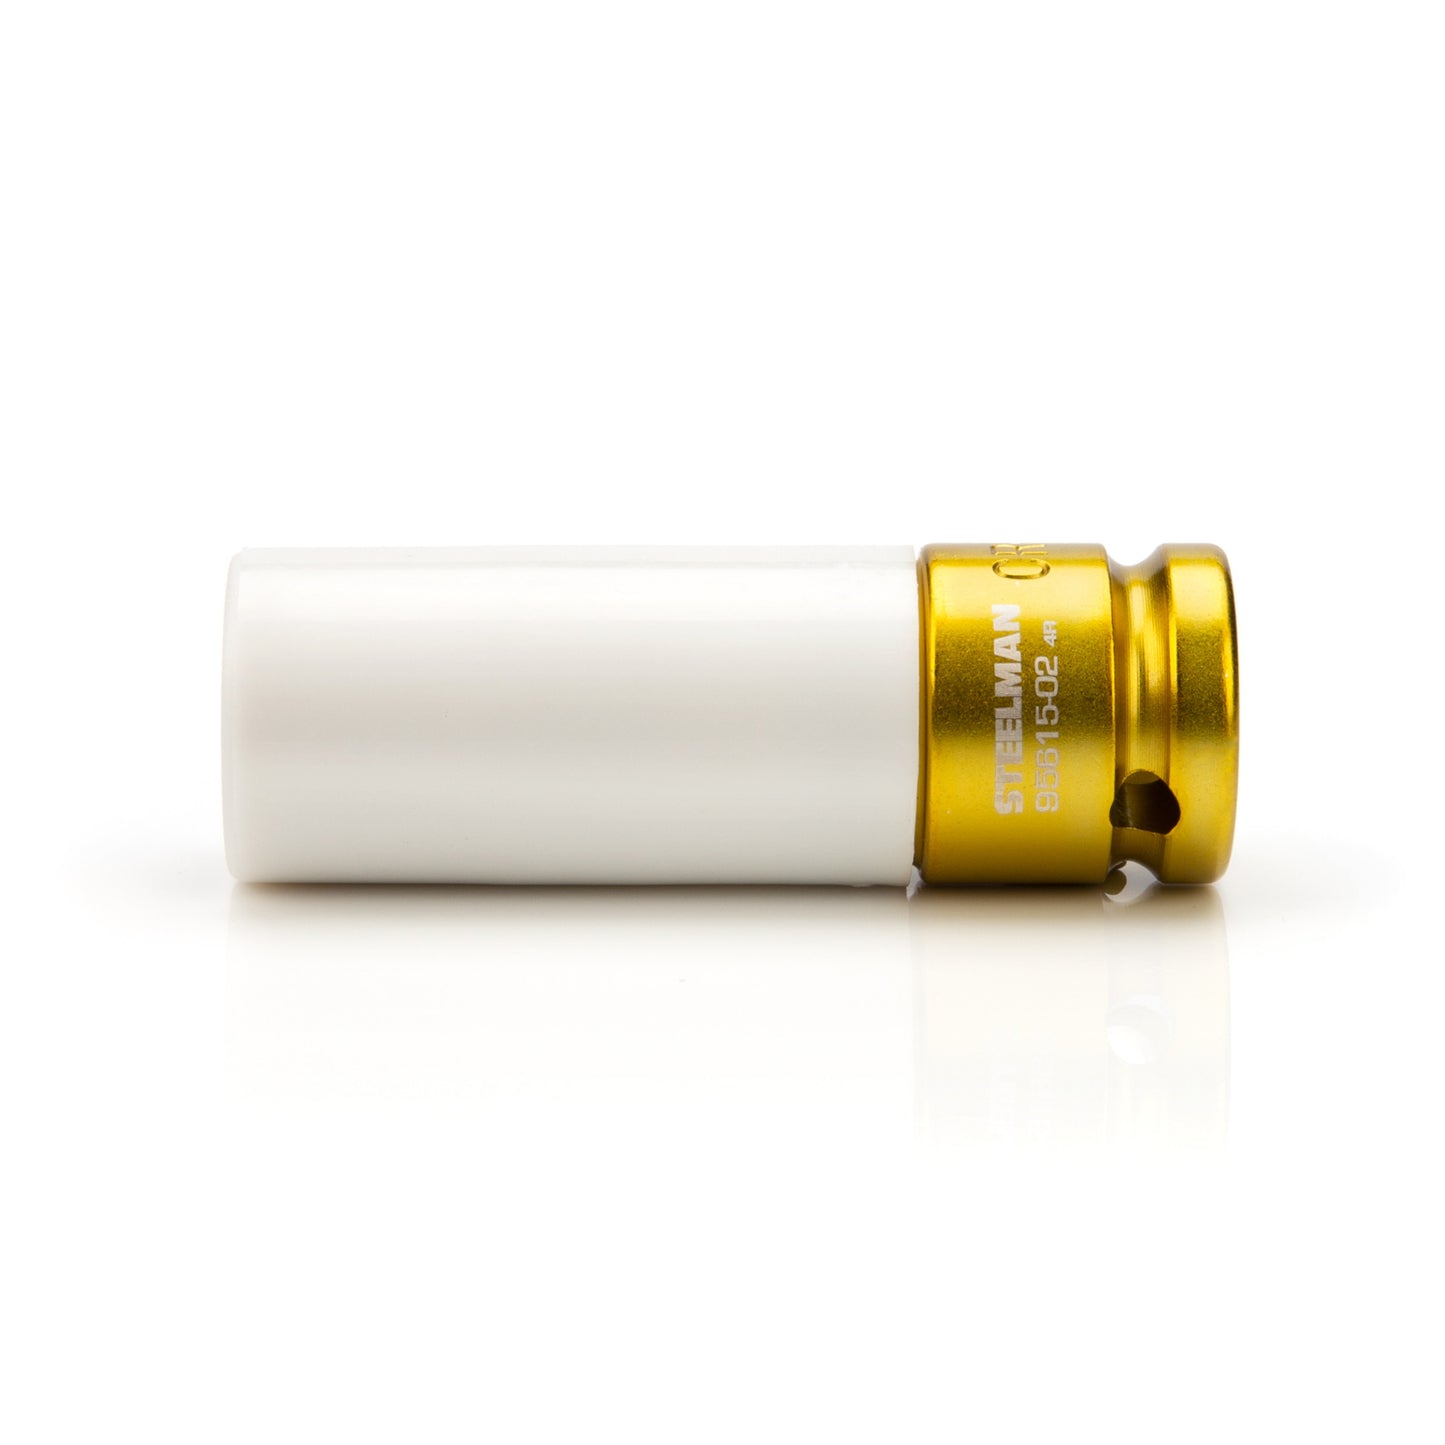 1/2-inch Drive 19mm Sleeved Impact Socket - Gold